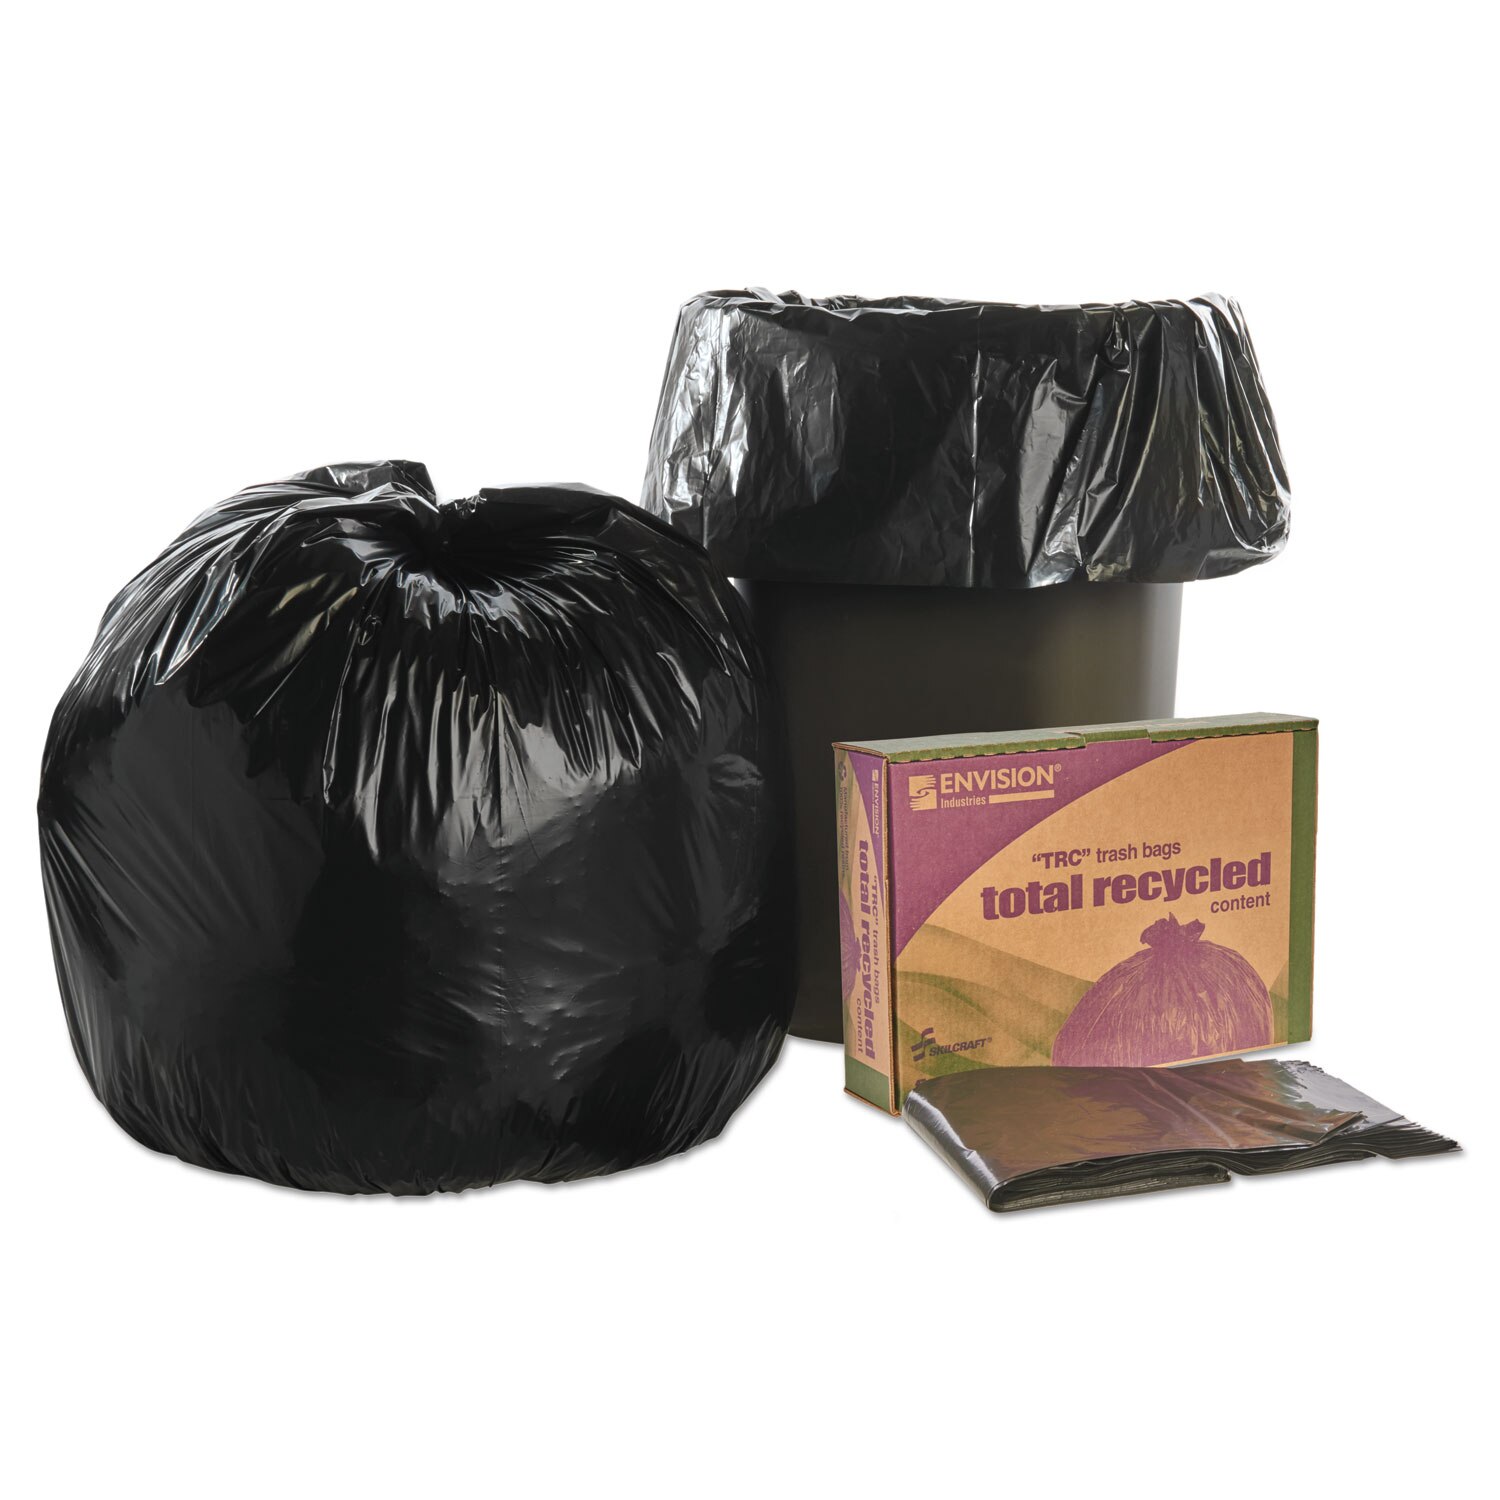 Heritage Linear Low-Density Can Liners, 16 gal, 0.35 mil, 24 x 32, Black, 500/Carton